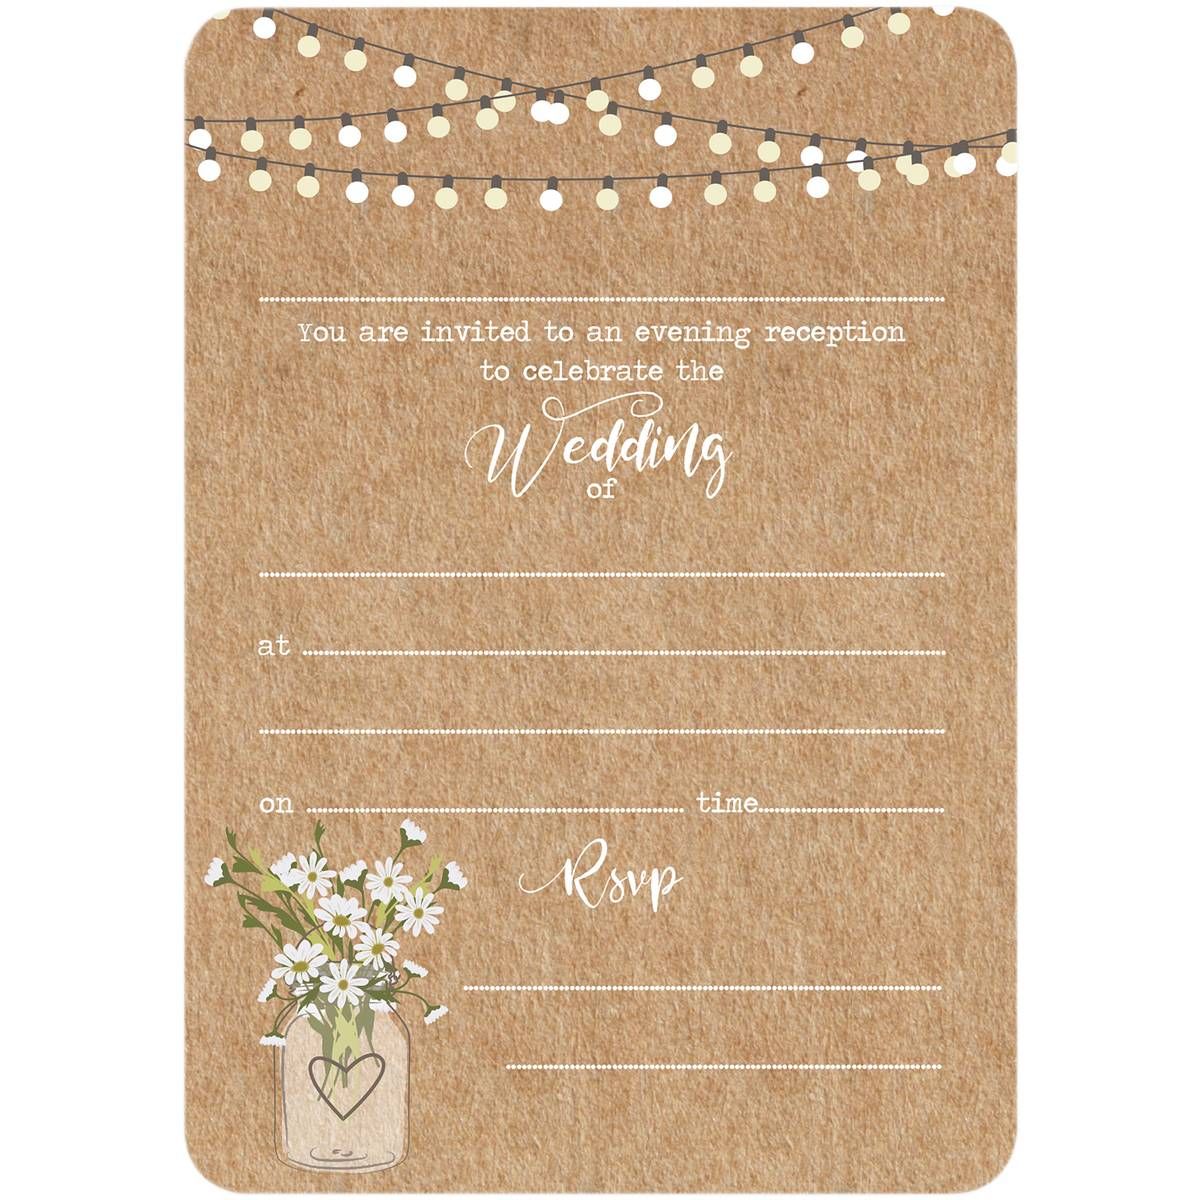 Rustic Mason Evening Invitations 10 Pack Hobbycraft With Images